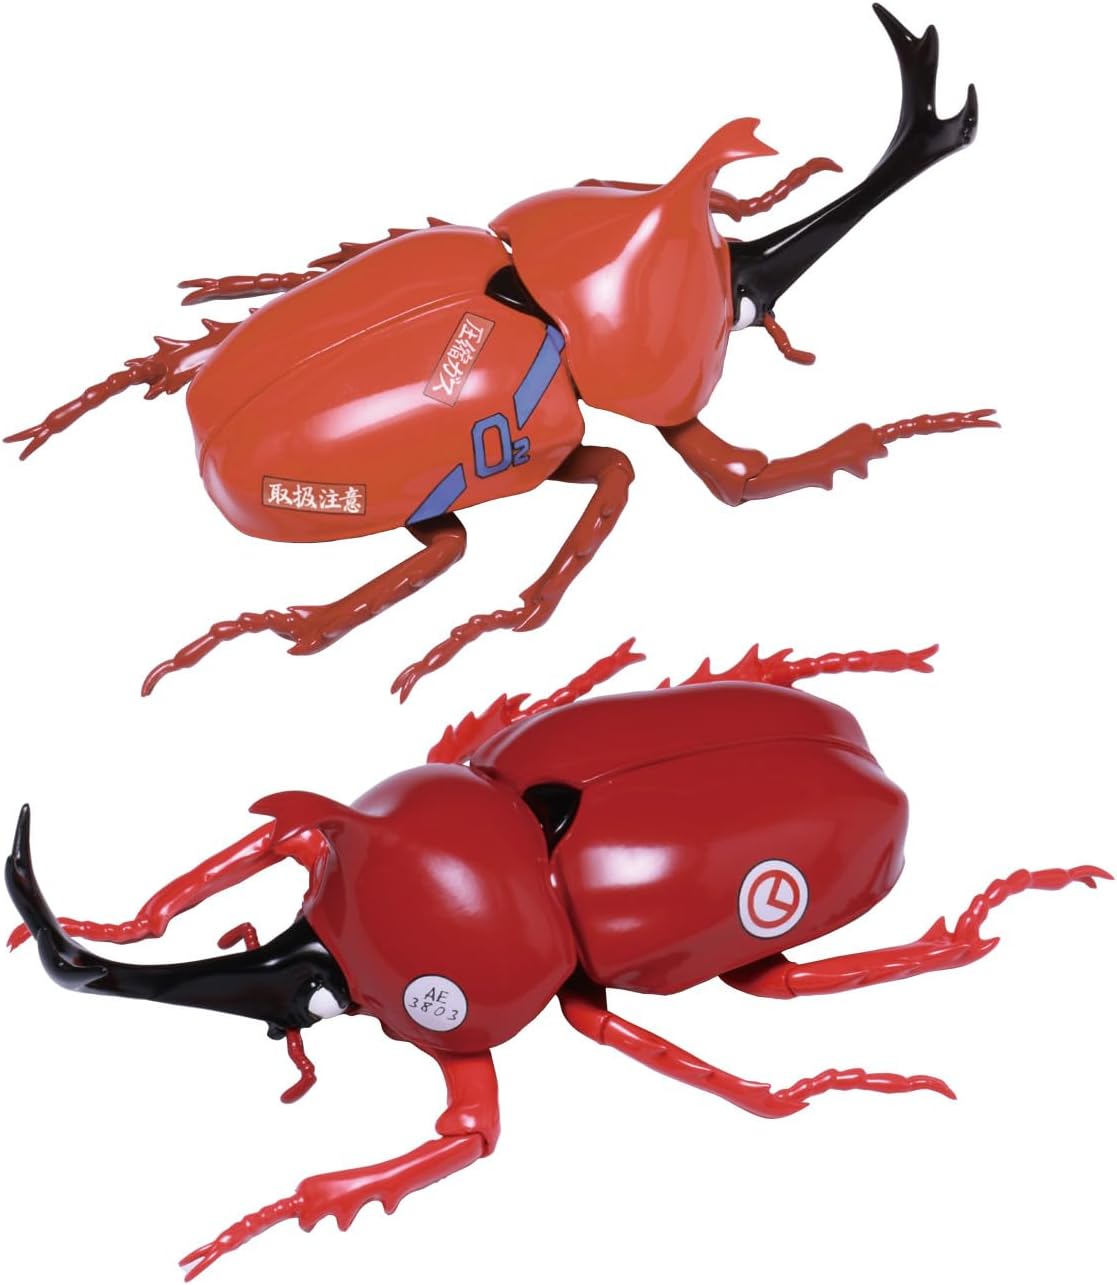 Fujimi Free Research Series No.217 Working Cell Beetle, Red Blood Cell, Artery/Vein Version - BanzaiHobby